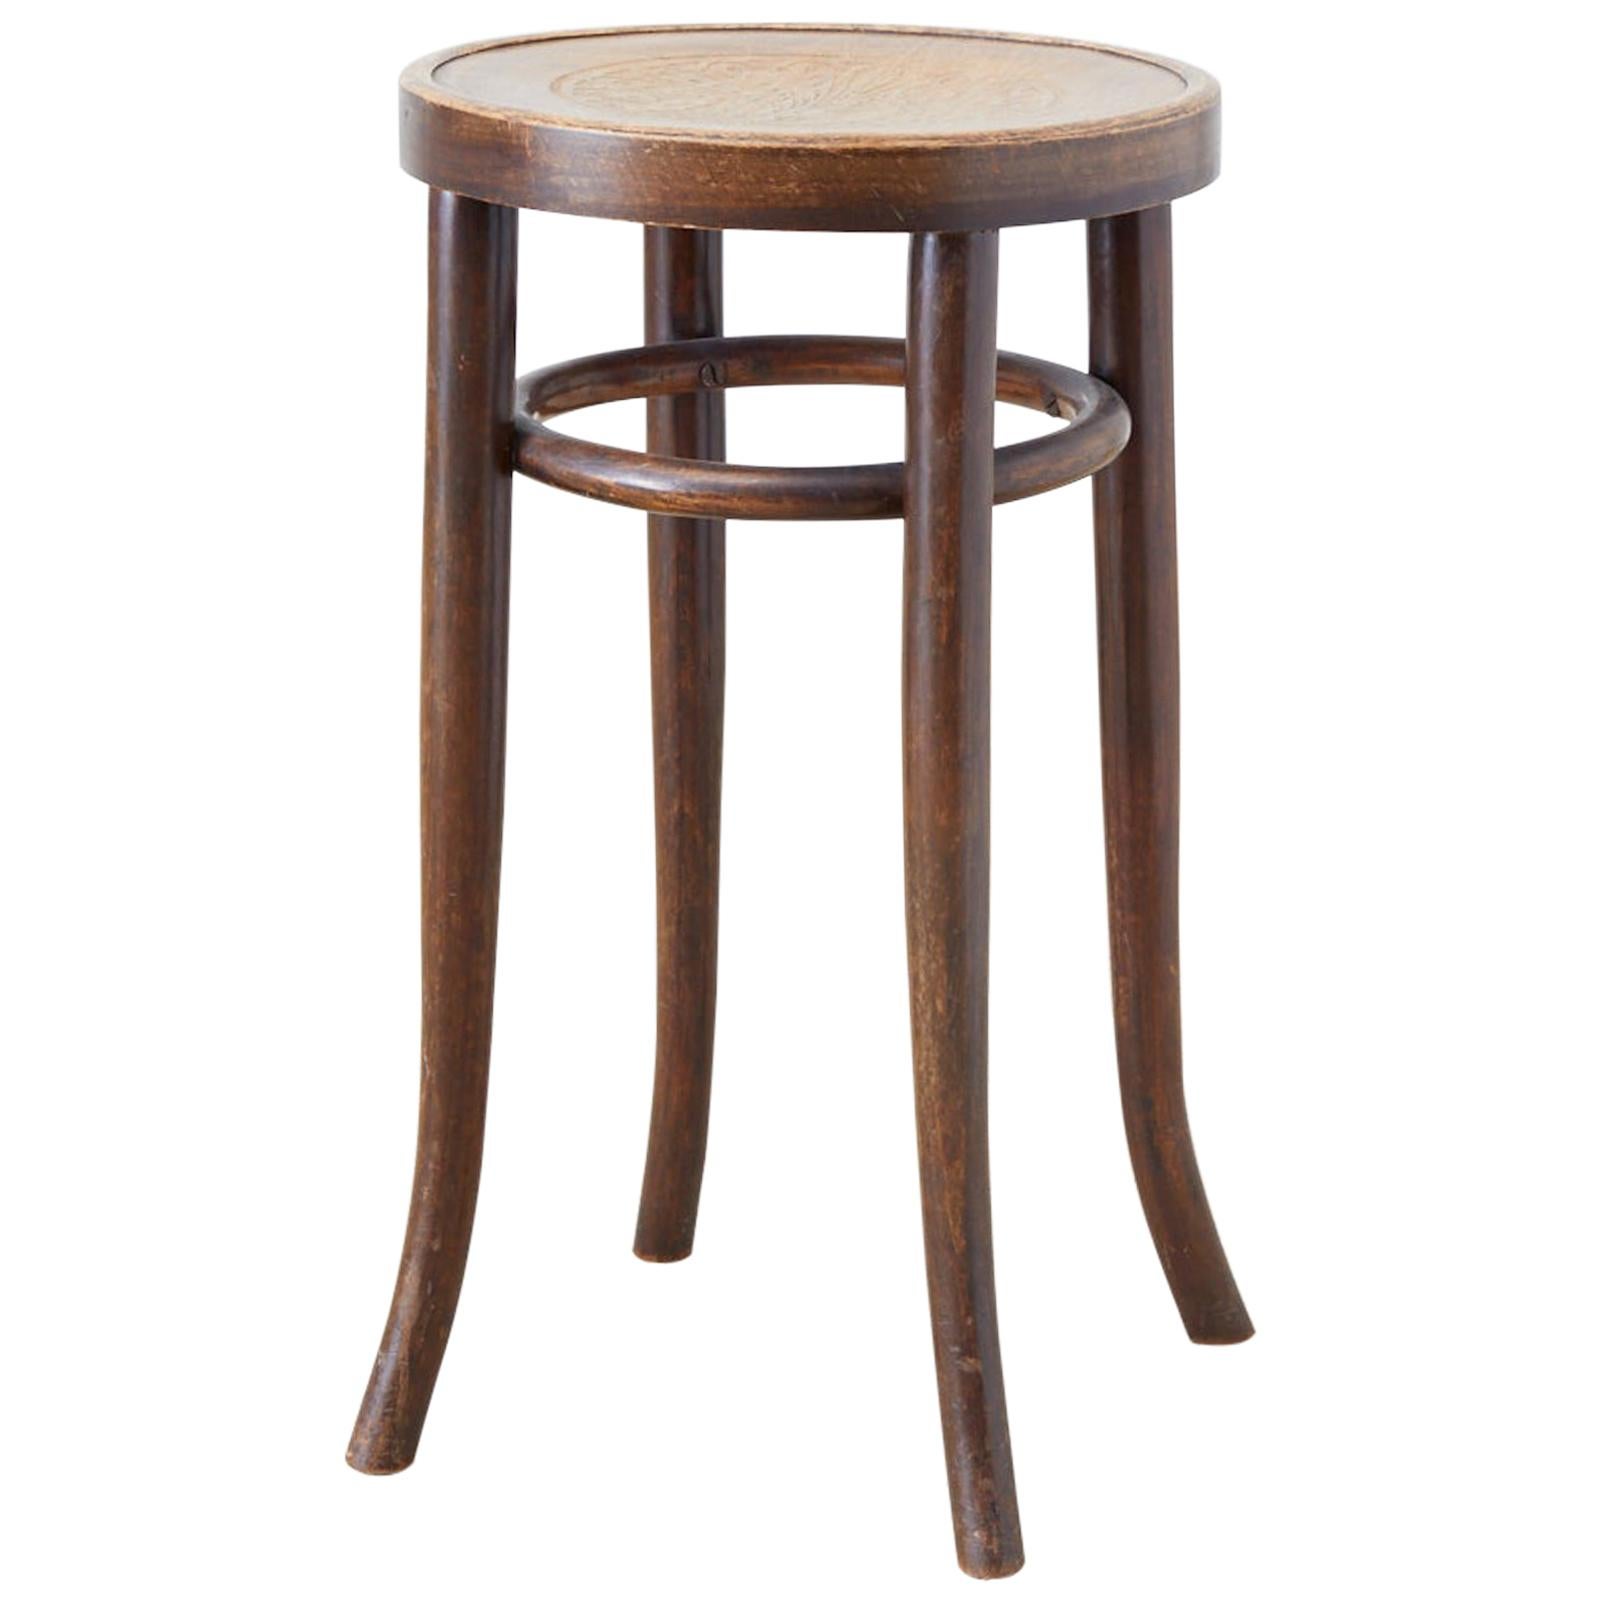 Early 20th Century Bentwood Stool Attributed to Thonet